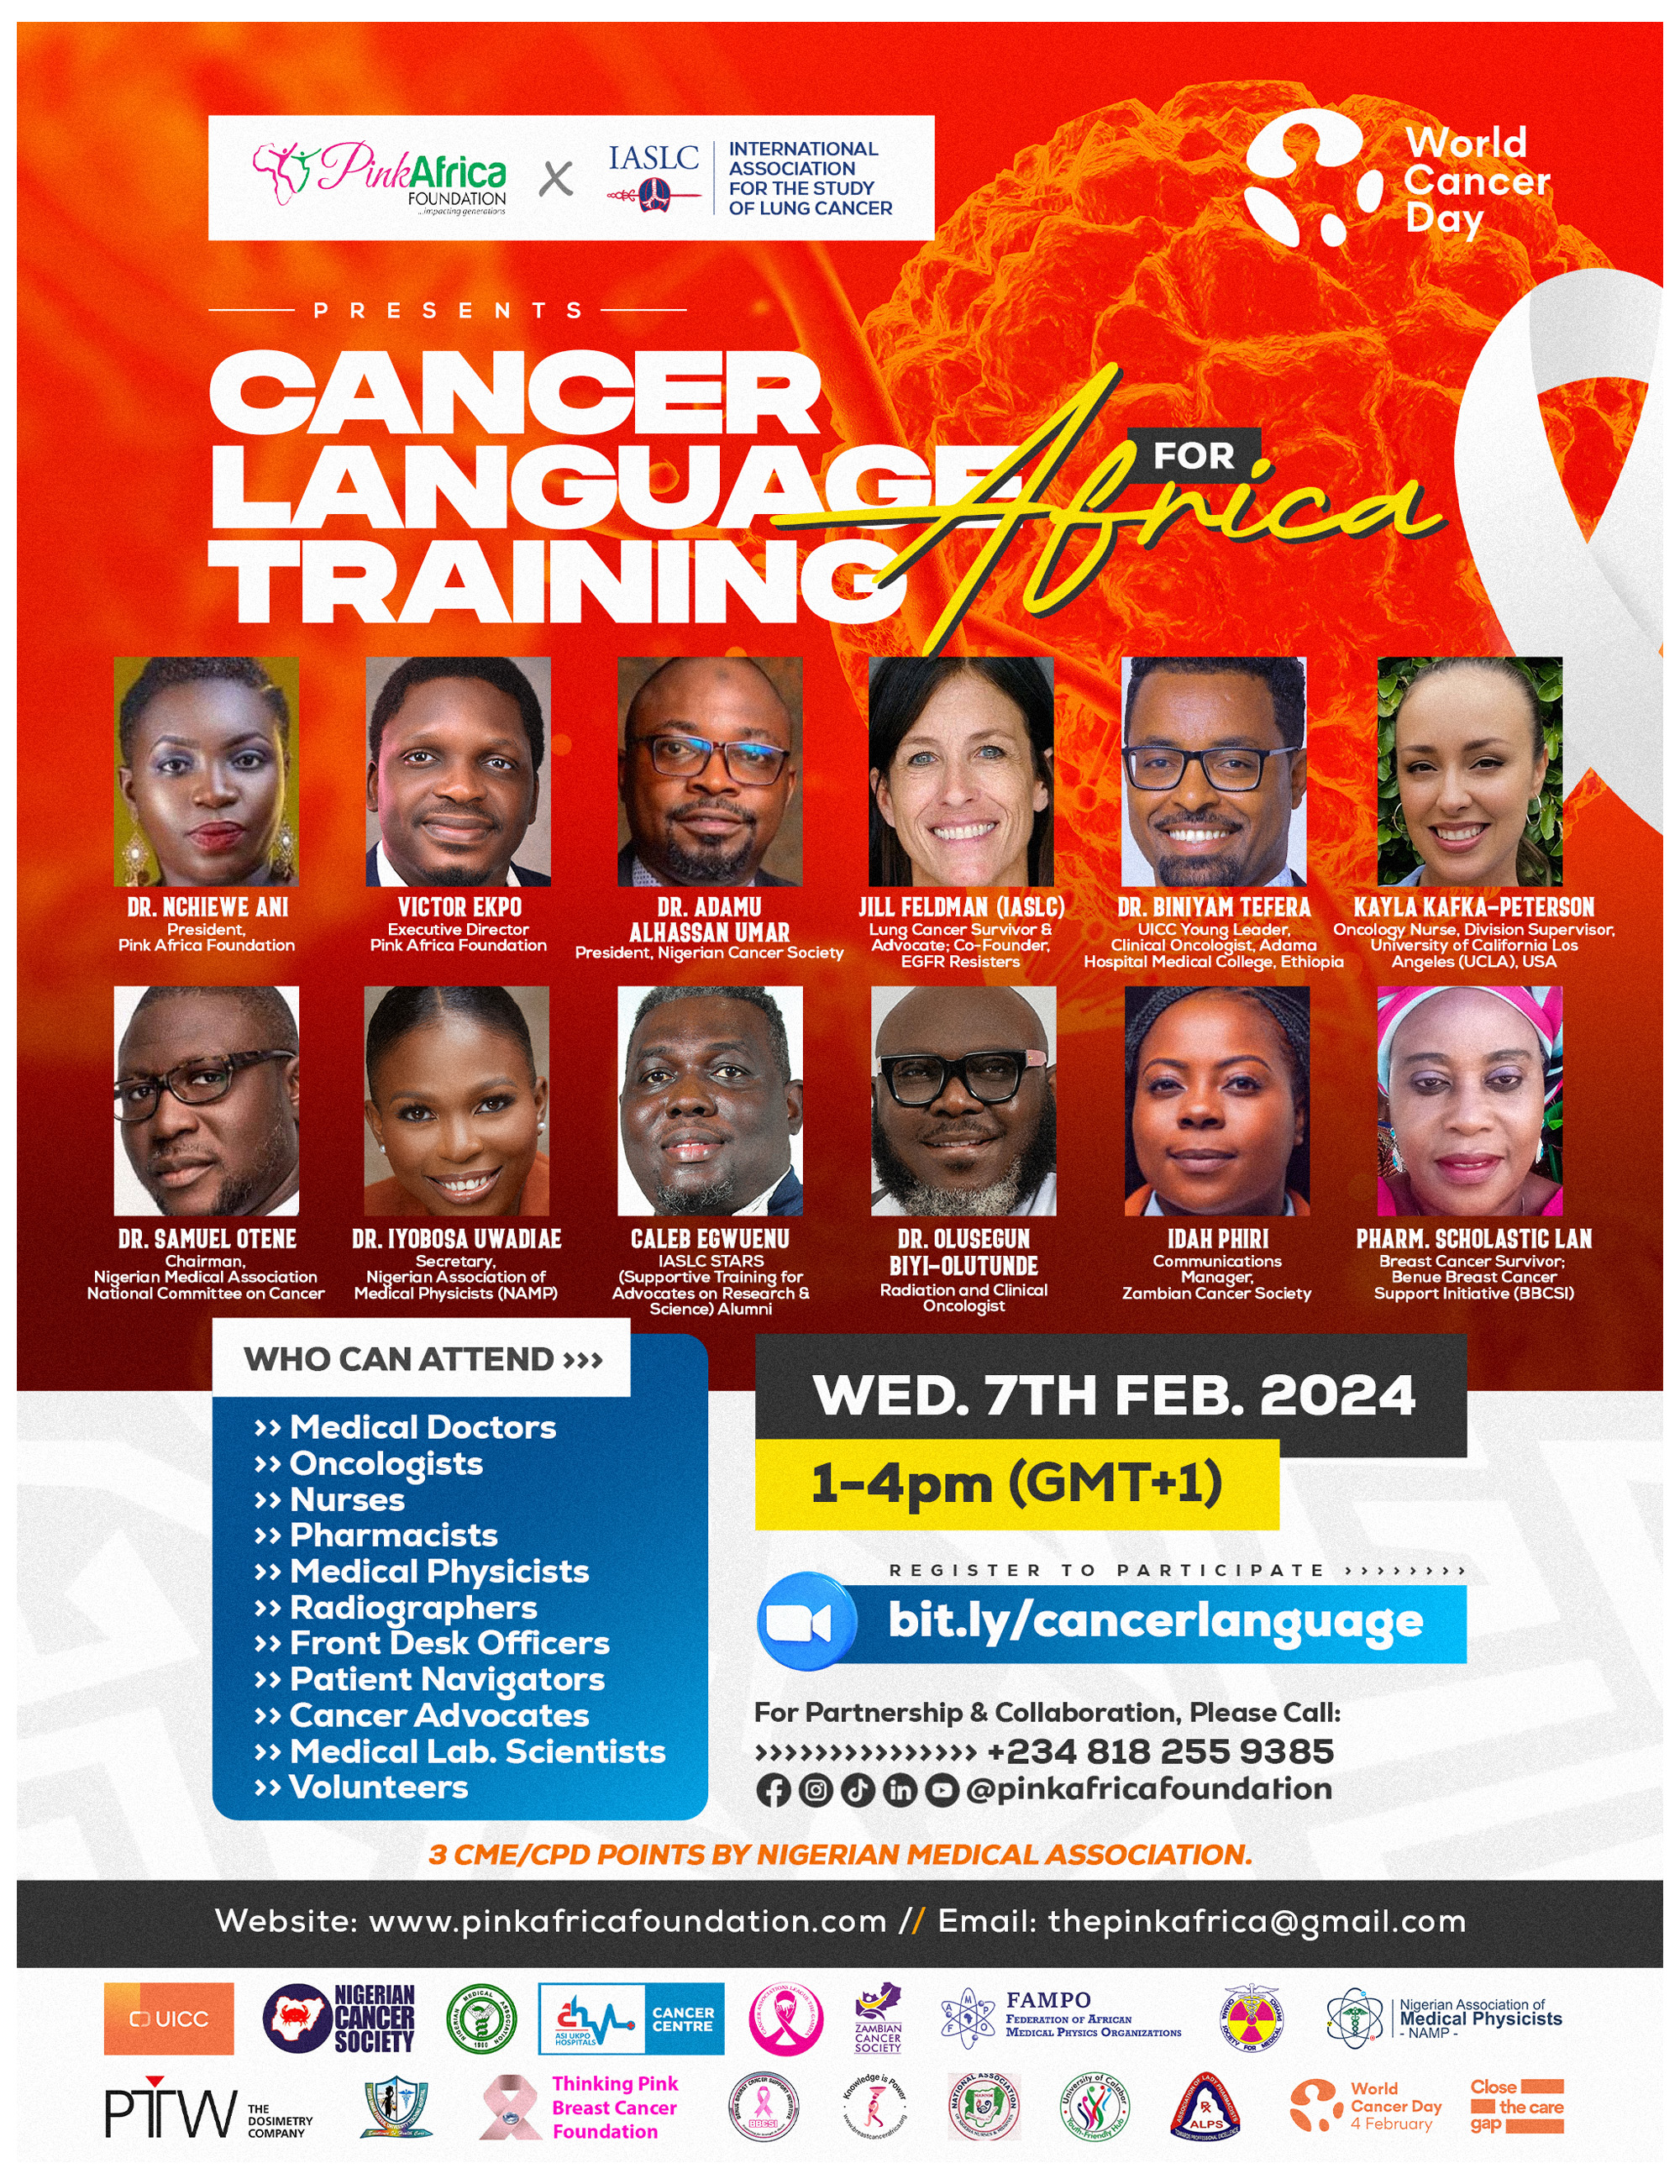 Cancer Language Training for Africa